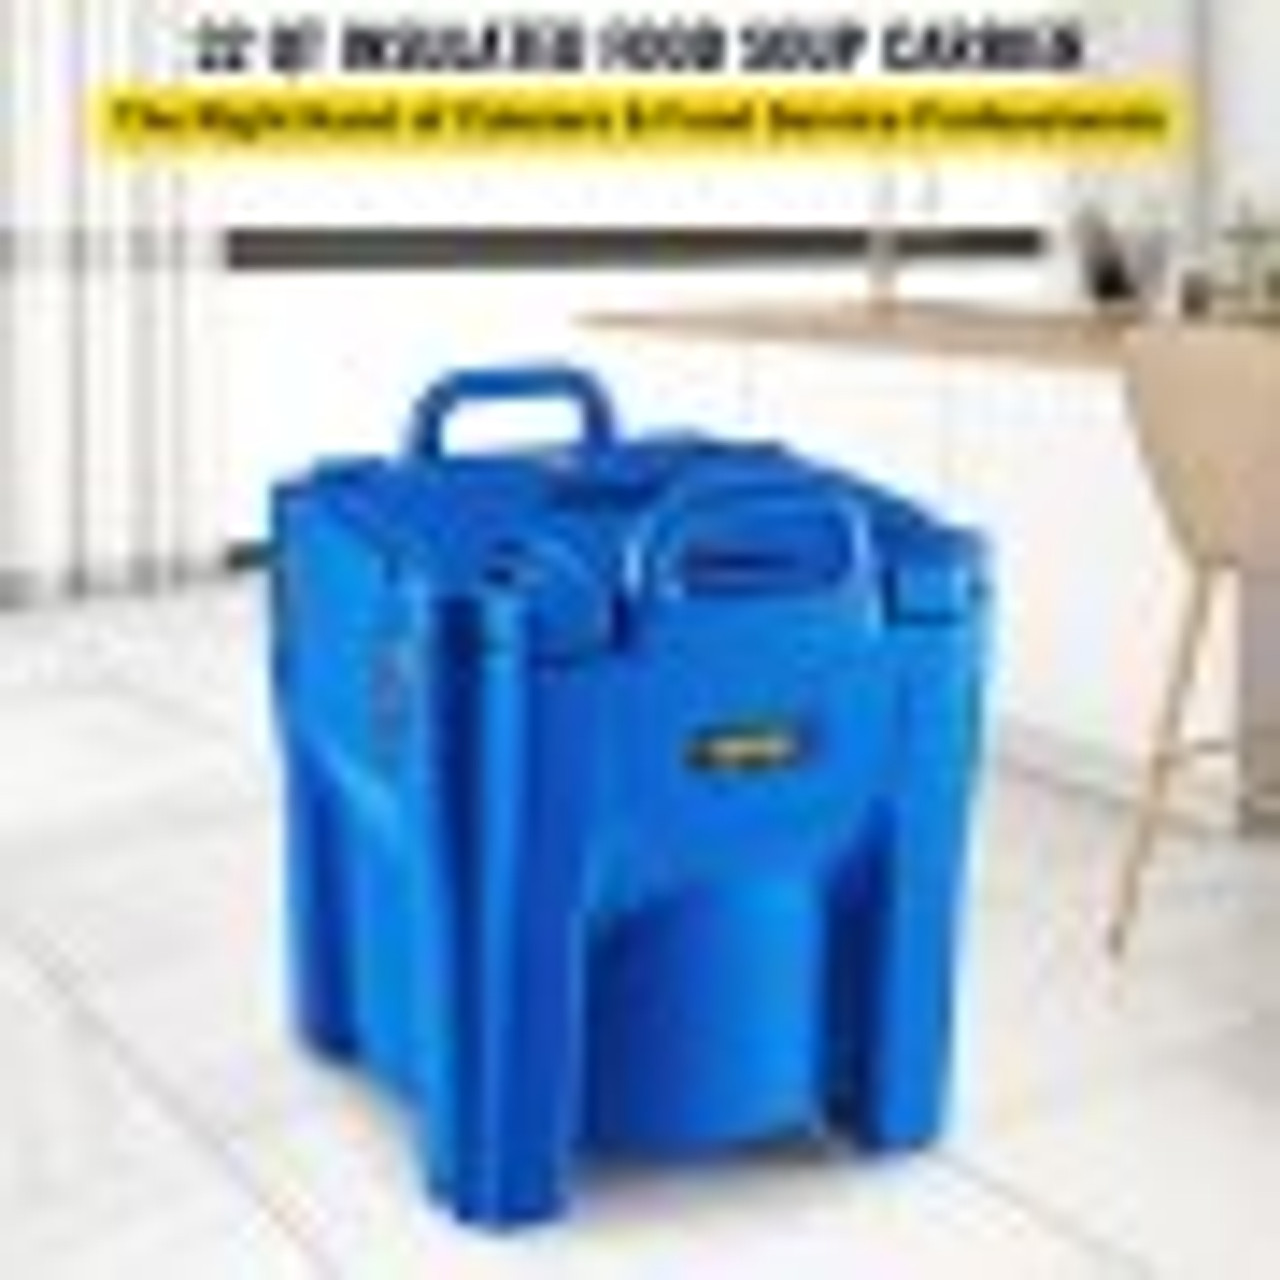 Insulated Food Carrier, 32Qt Capacity, Stackable Catering Hot Box w/Stainless Steel Barrel, Top Load LLDPE Food Warmer w/Integral Handles Buckles Stationary Base, for Restaurant Canteen, Blue